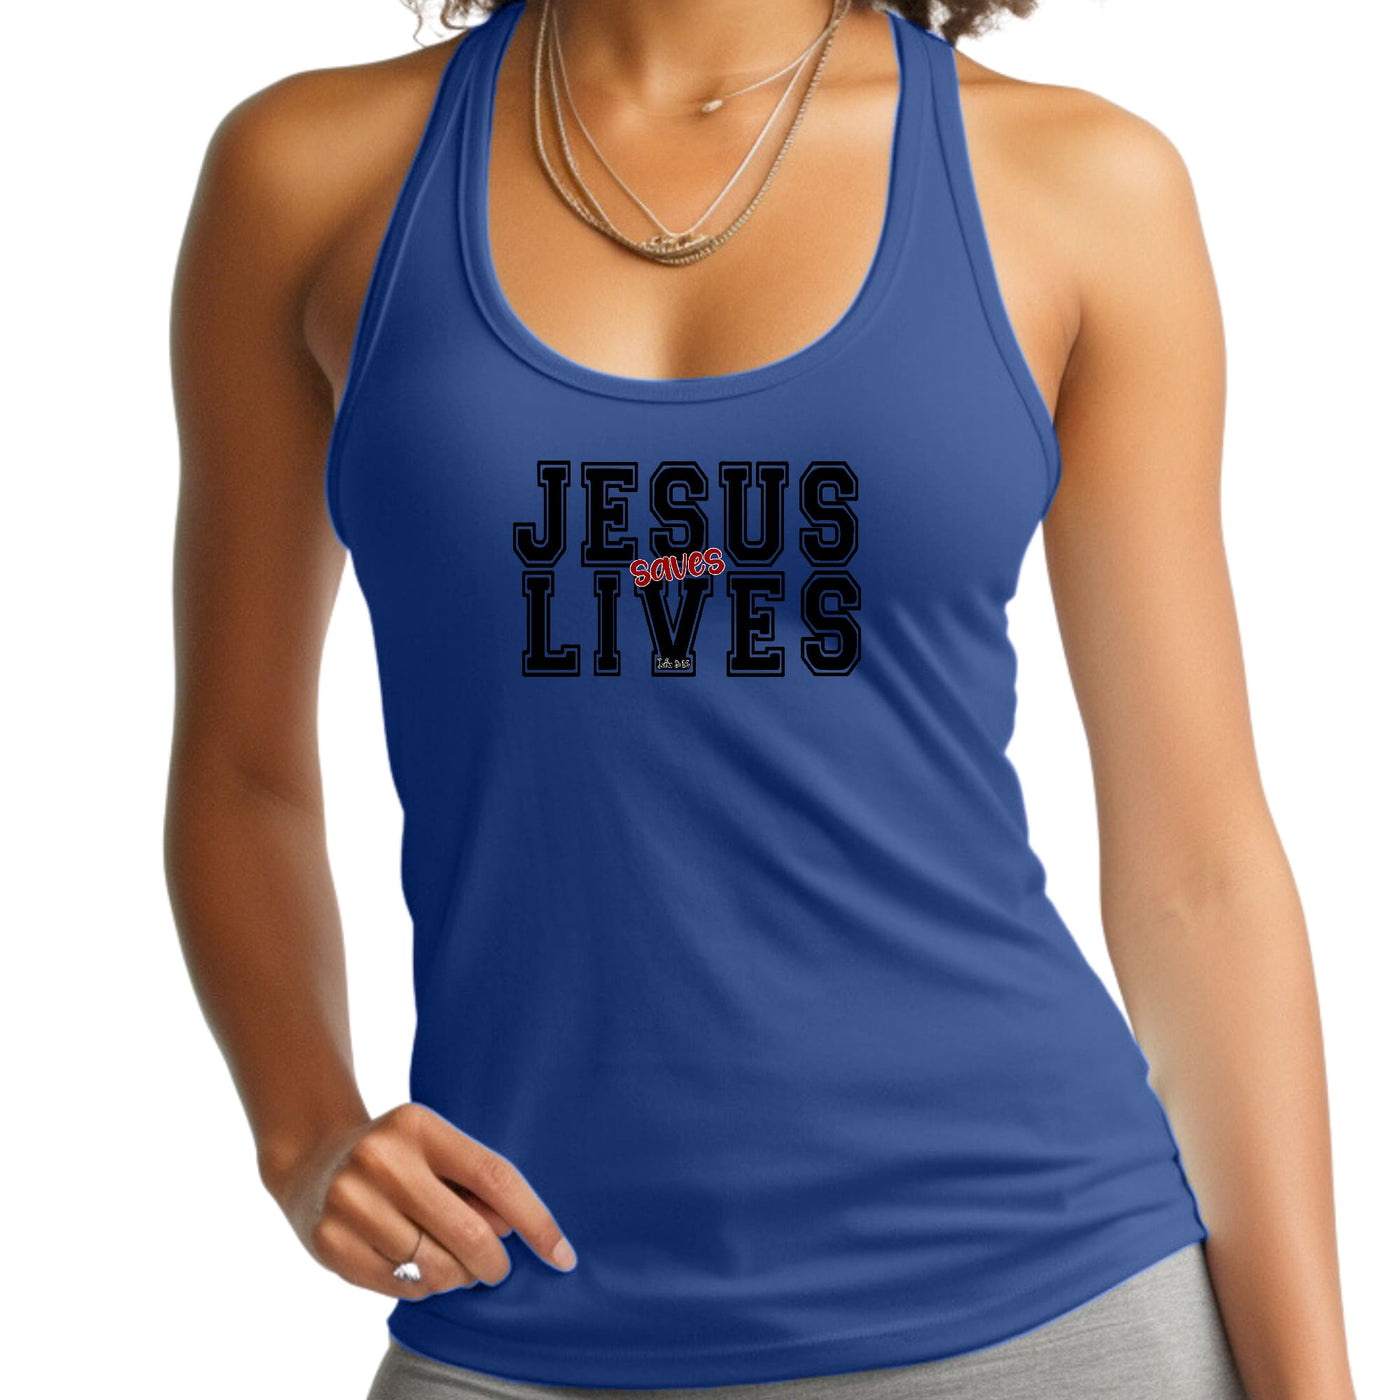 Womens Tank Top Fitness T - shirt Jesus Saves Lives Black Red - Tops